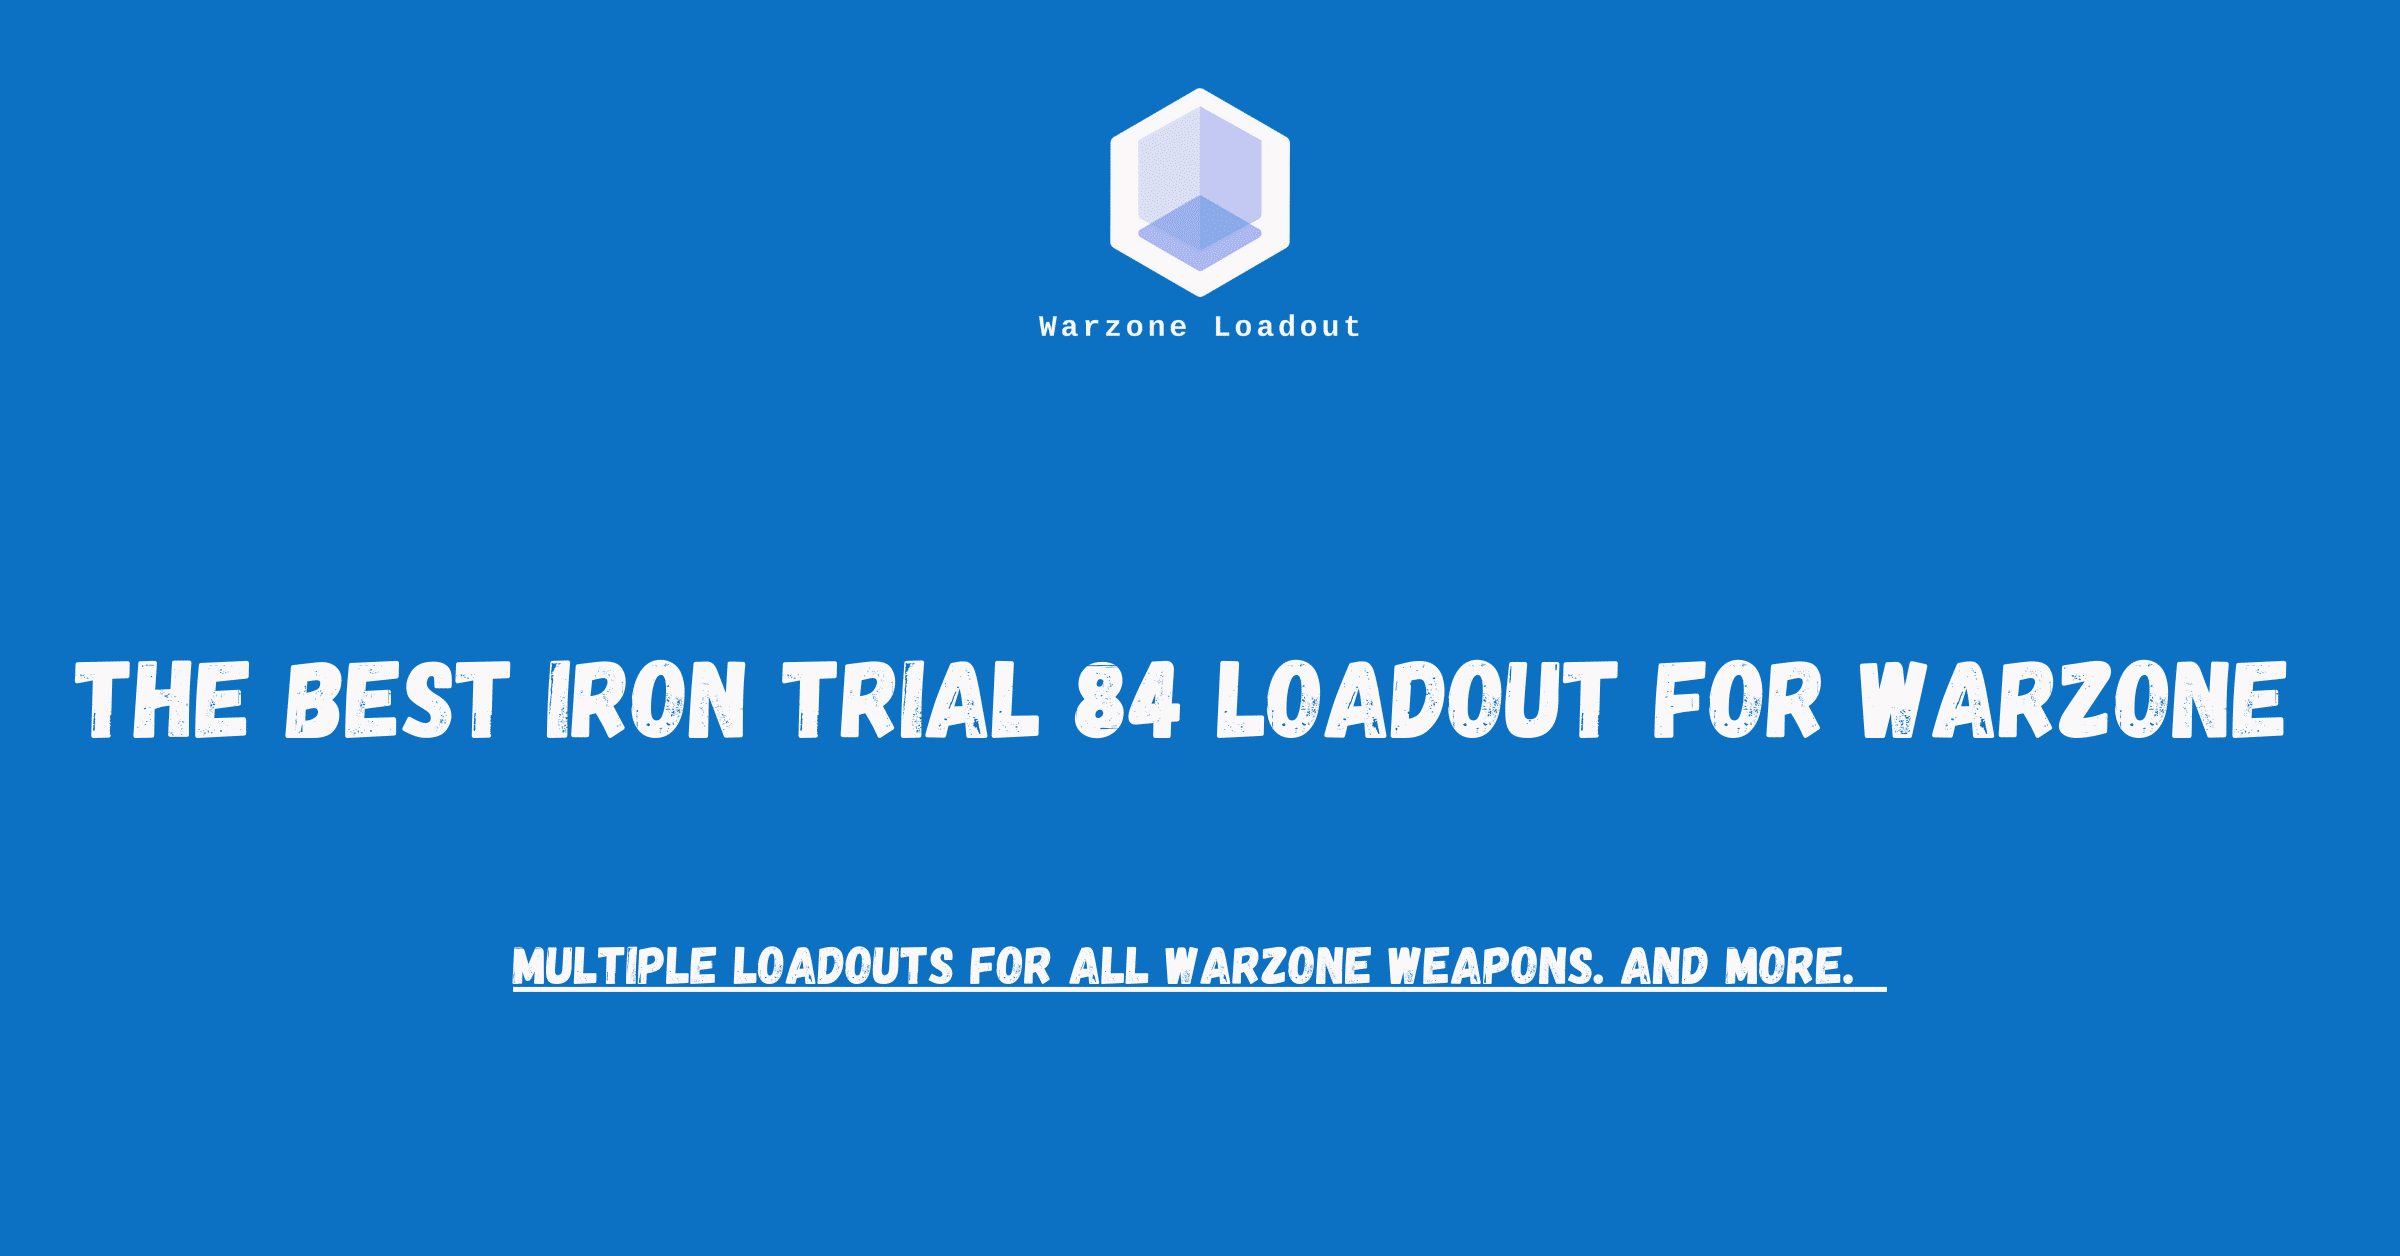 The best iron trial 84 loadouts